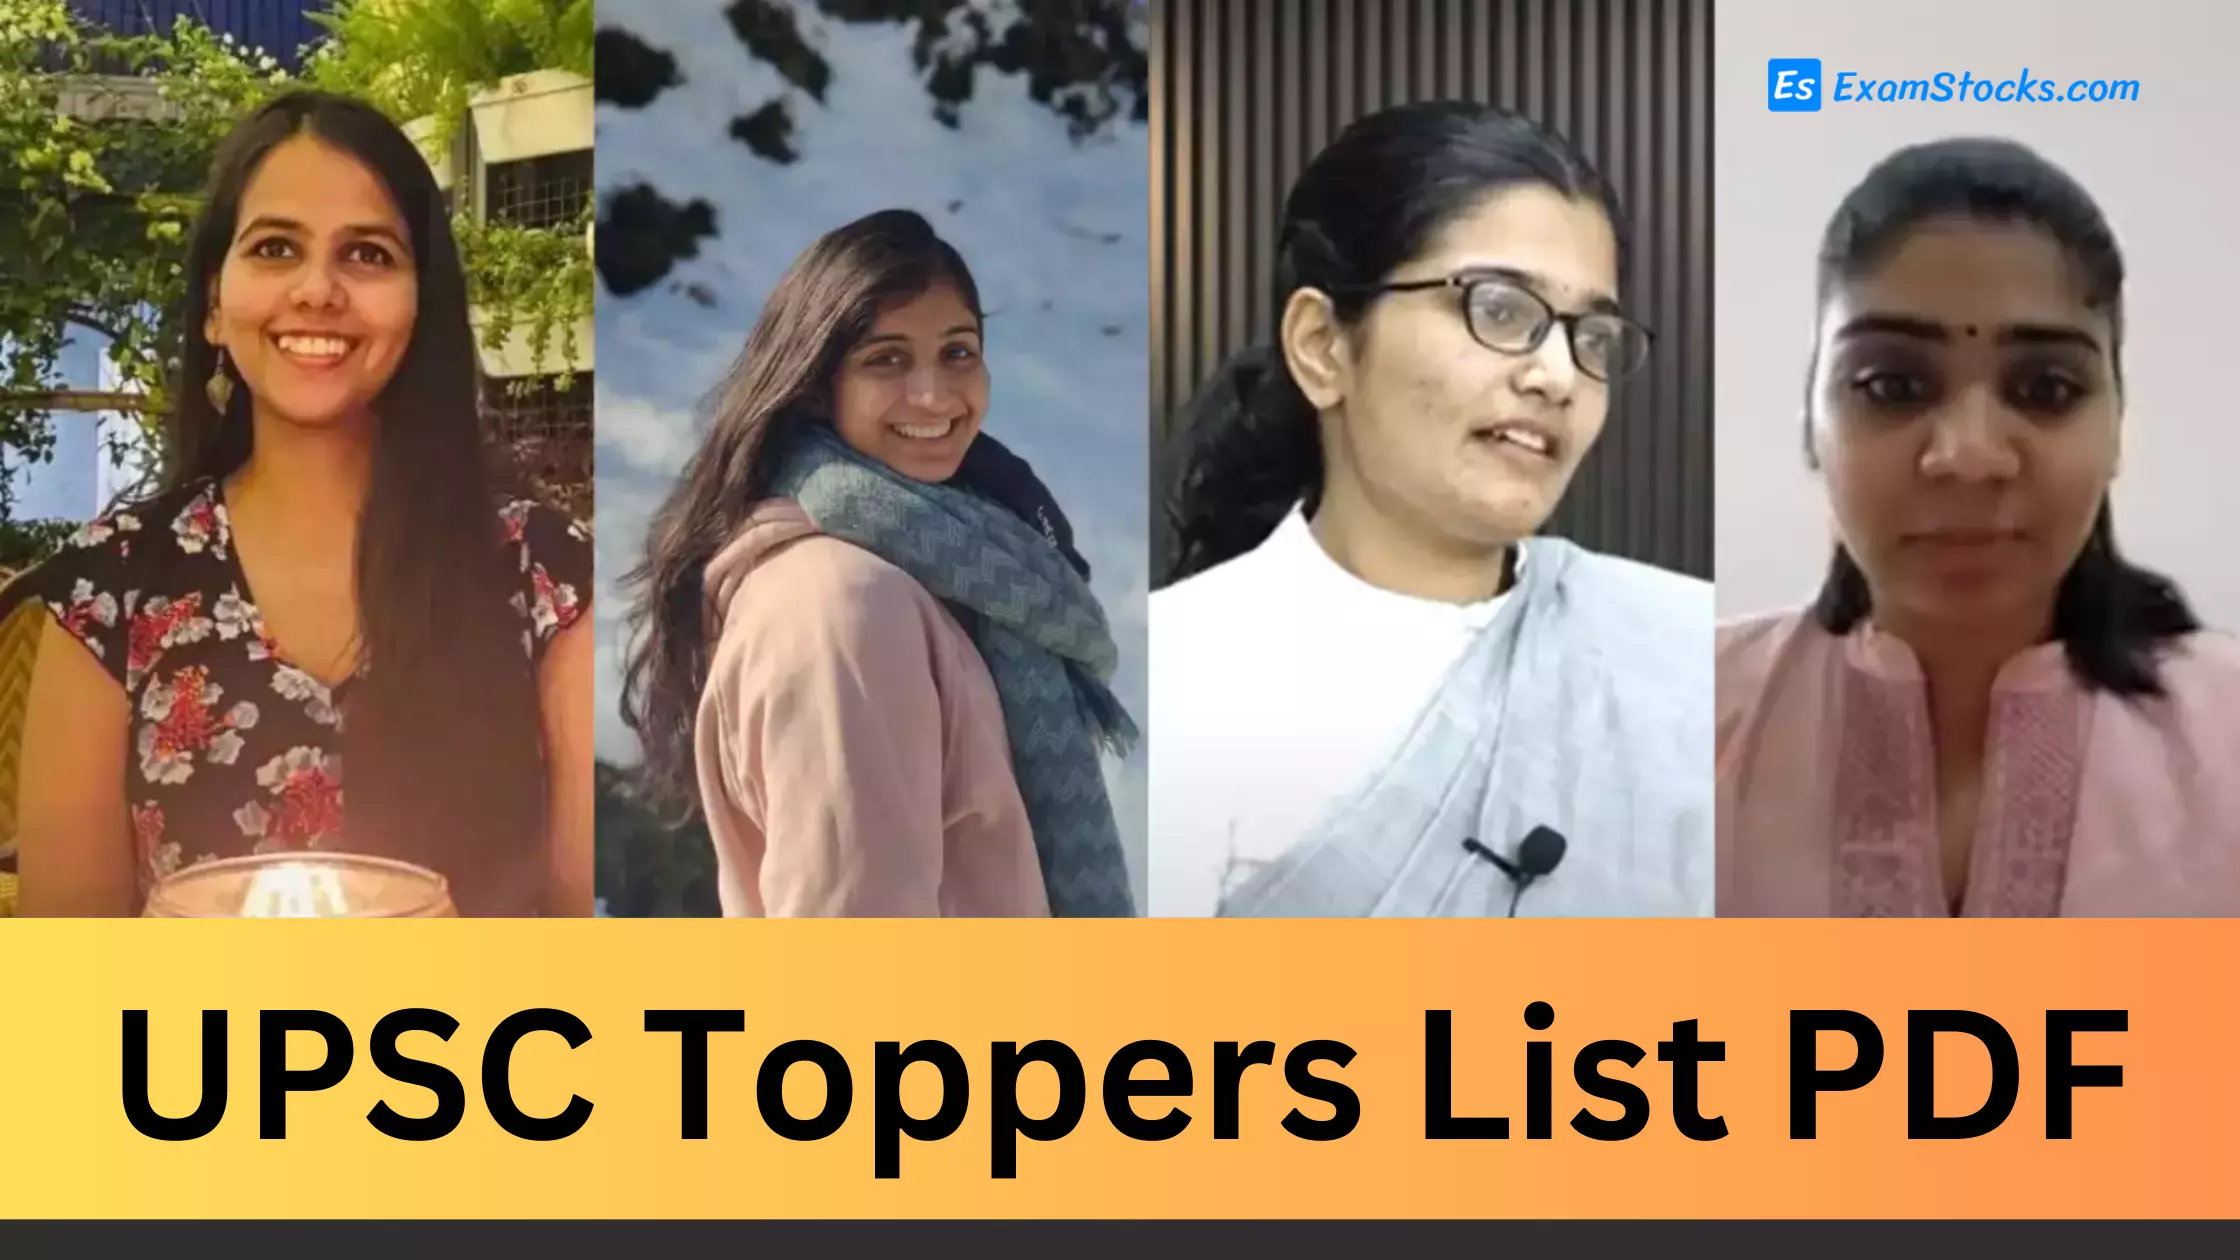 UPSC Toppers List PDF